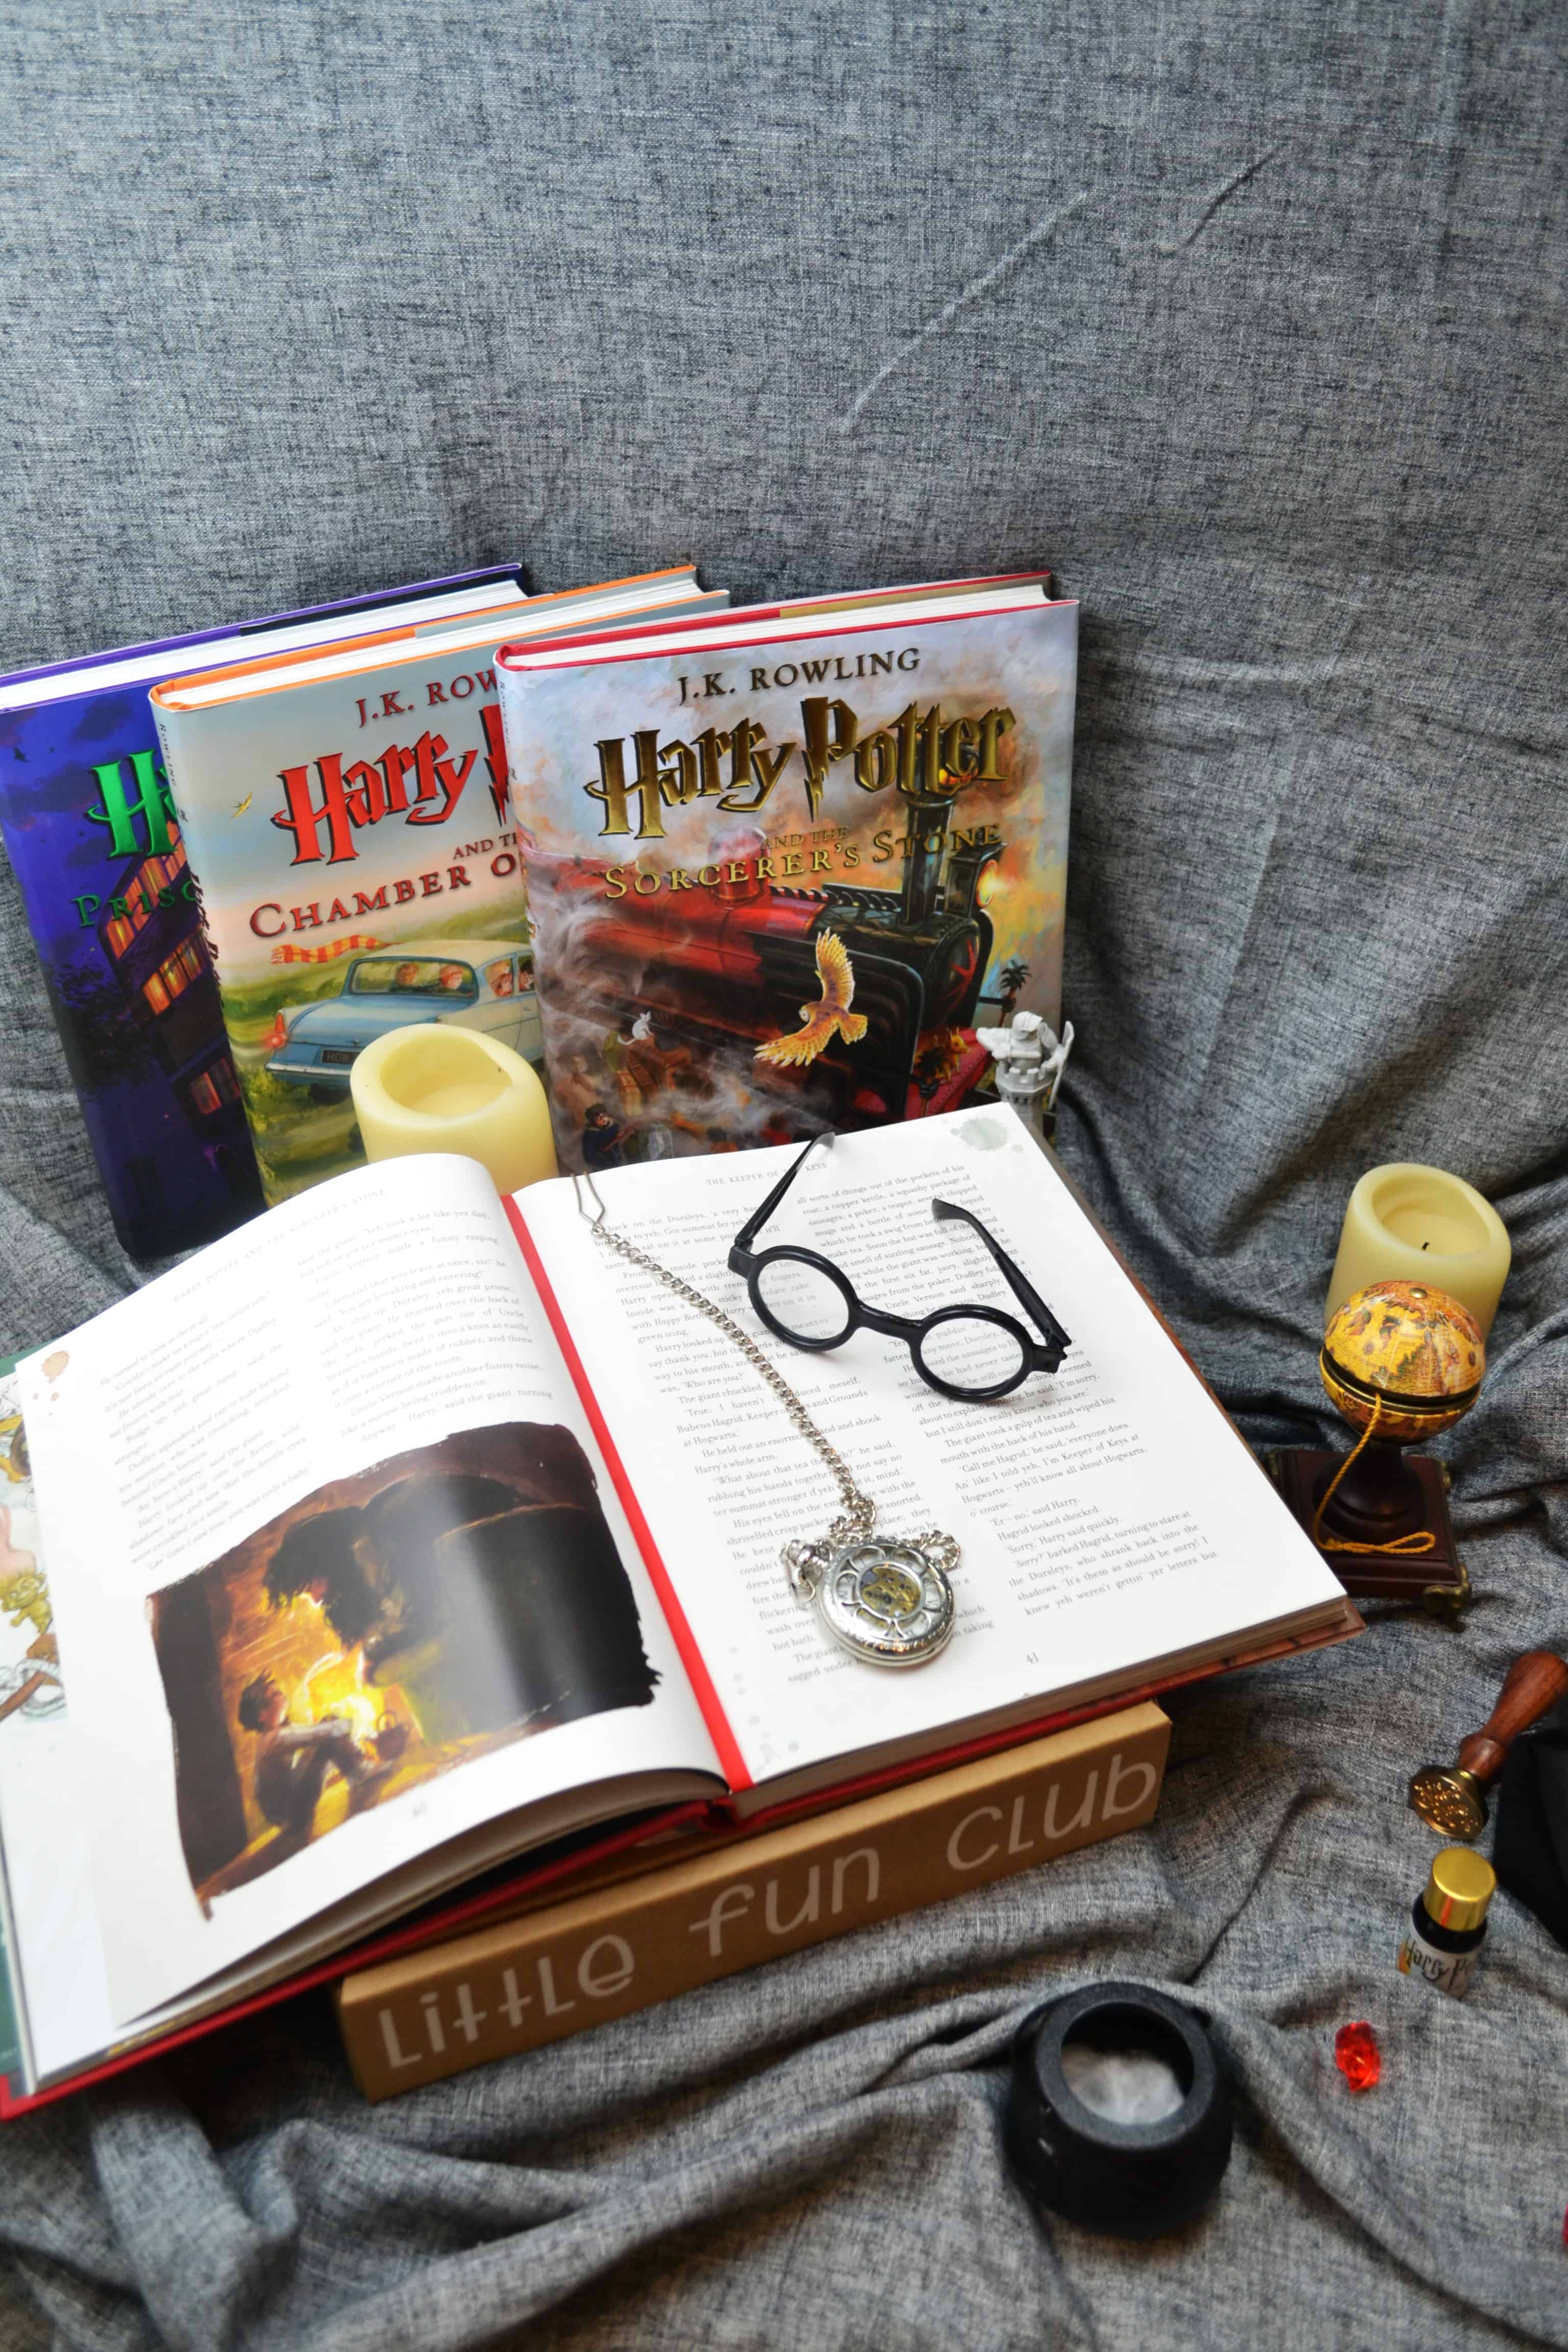 Harry Potter Box - include a book as well as items that go with